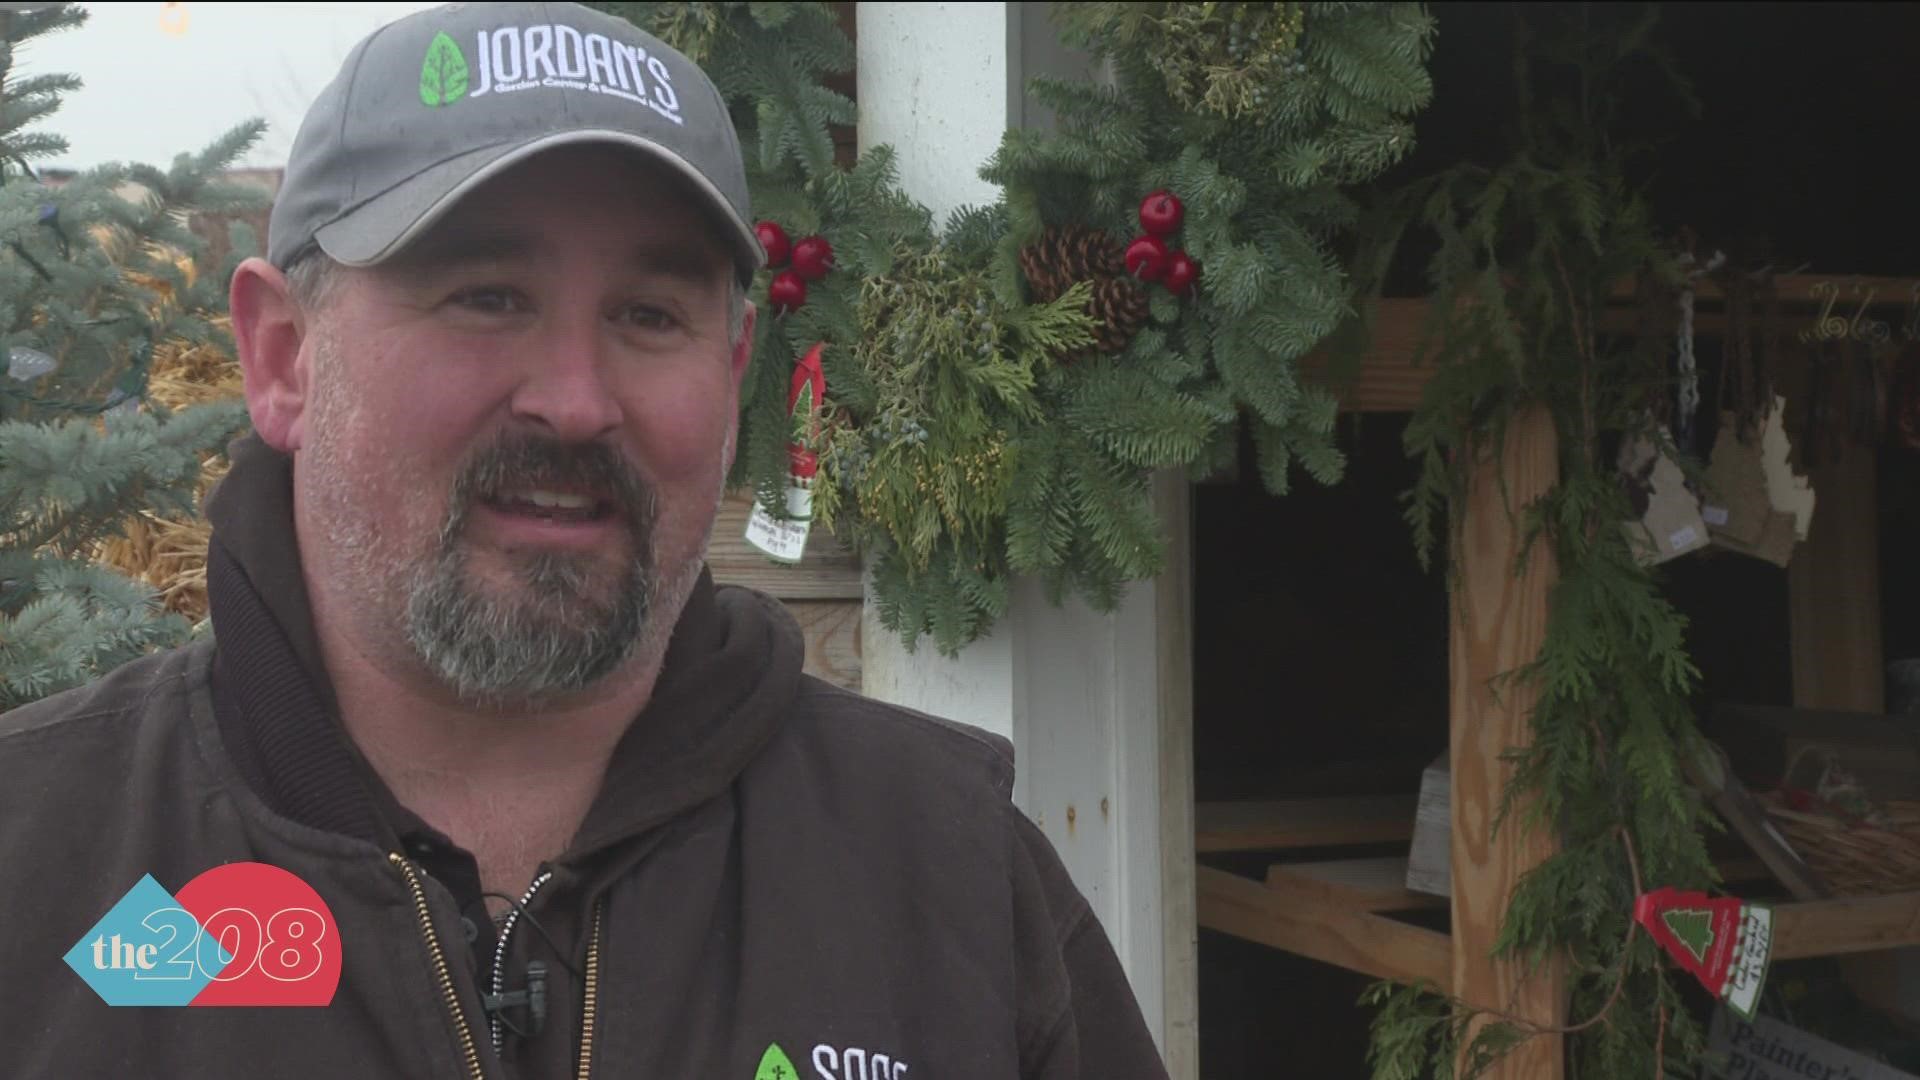 Fires, droughts, and general inflation have contributed to continuously rising costs, according to Jordan Risch at Jordan's Garden Center and Season Market.